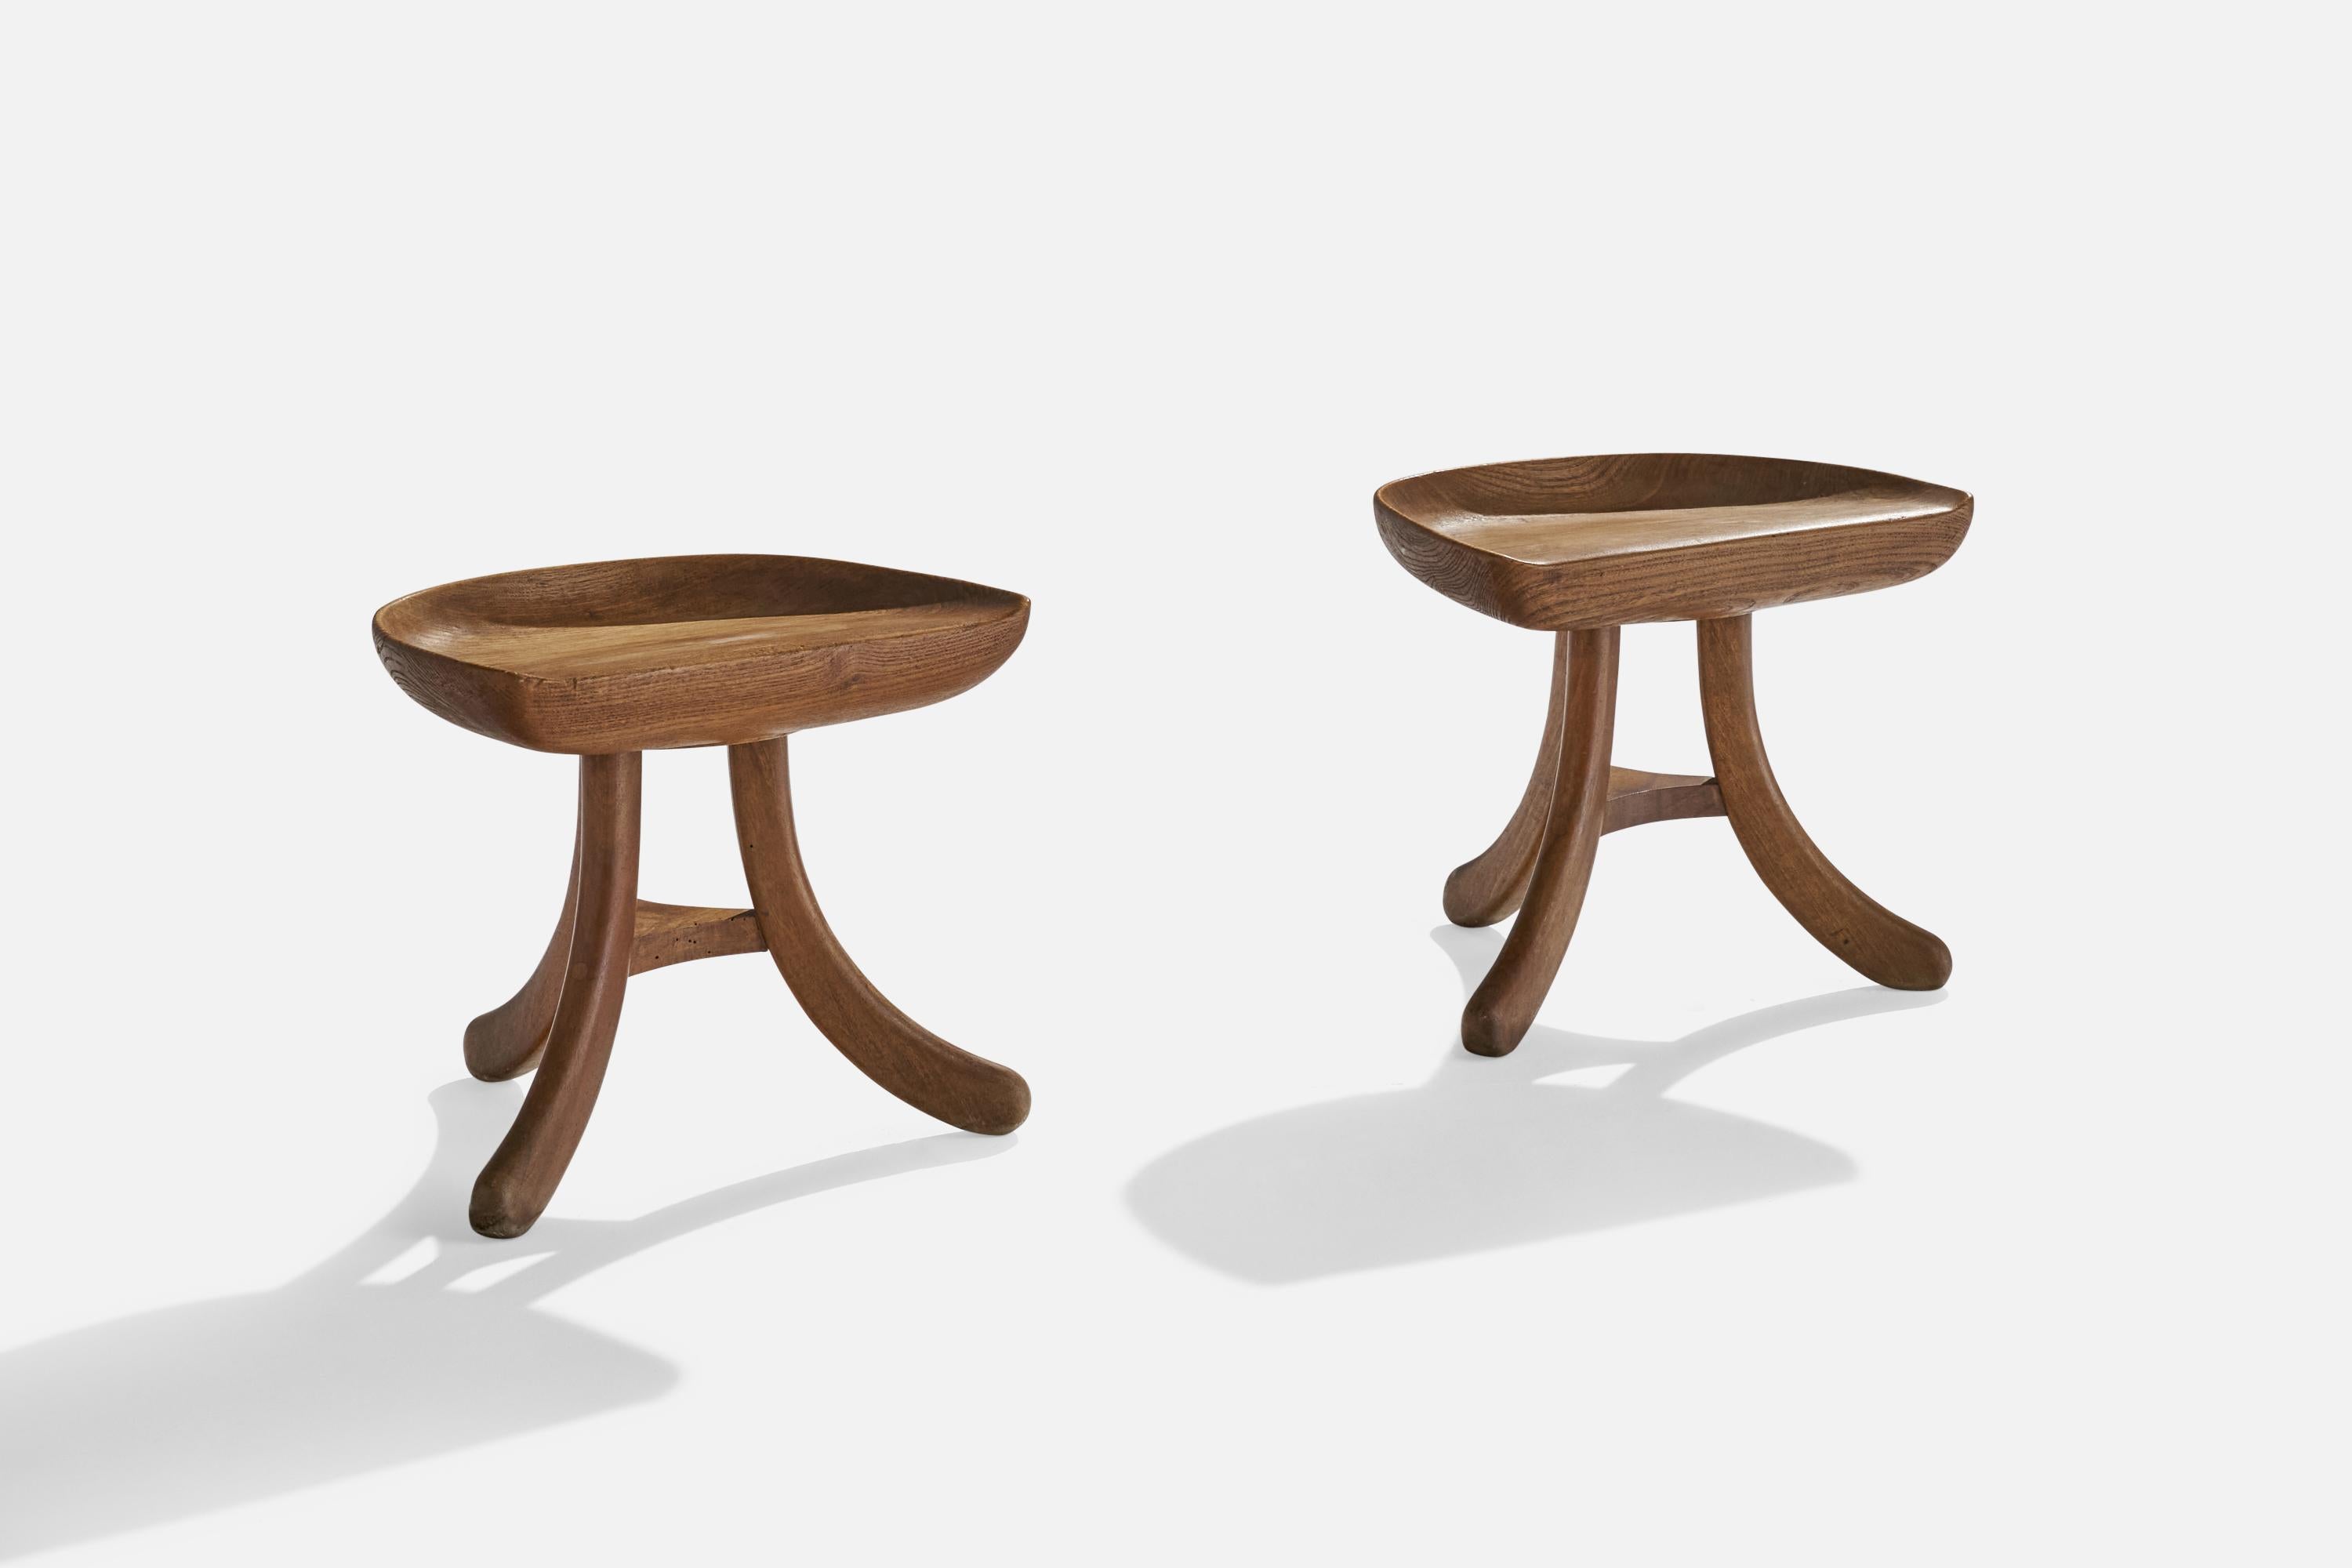 A pair of wood stools designed and produced by Mario Passanti, Italy, 1960s.

seat height 13.5”.